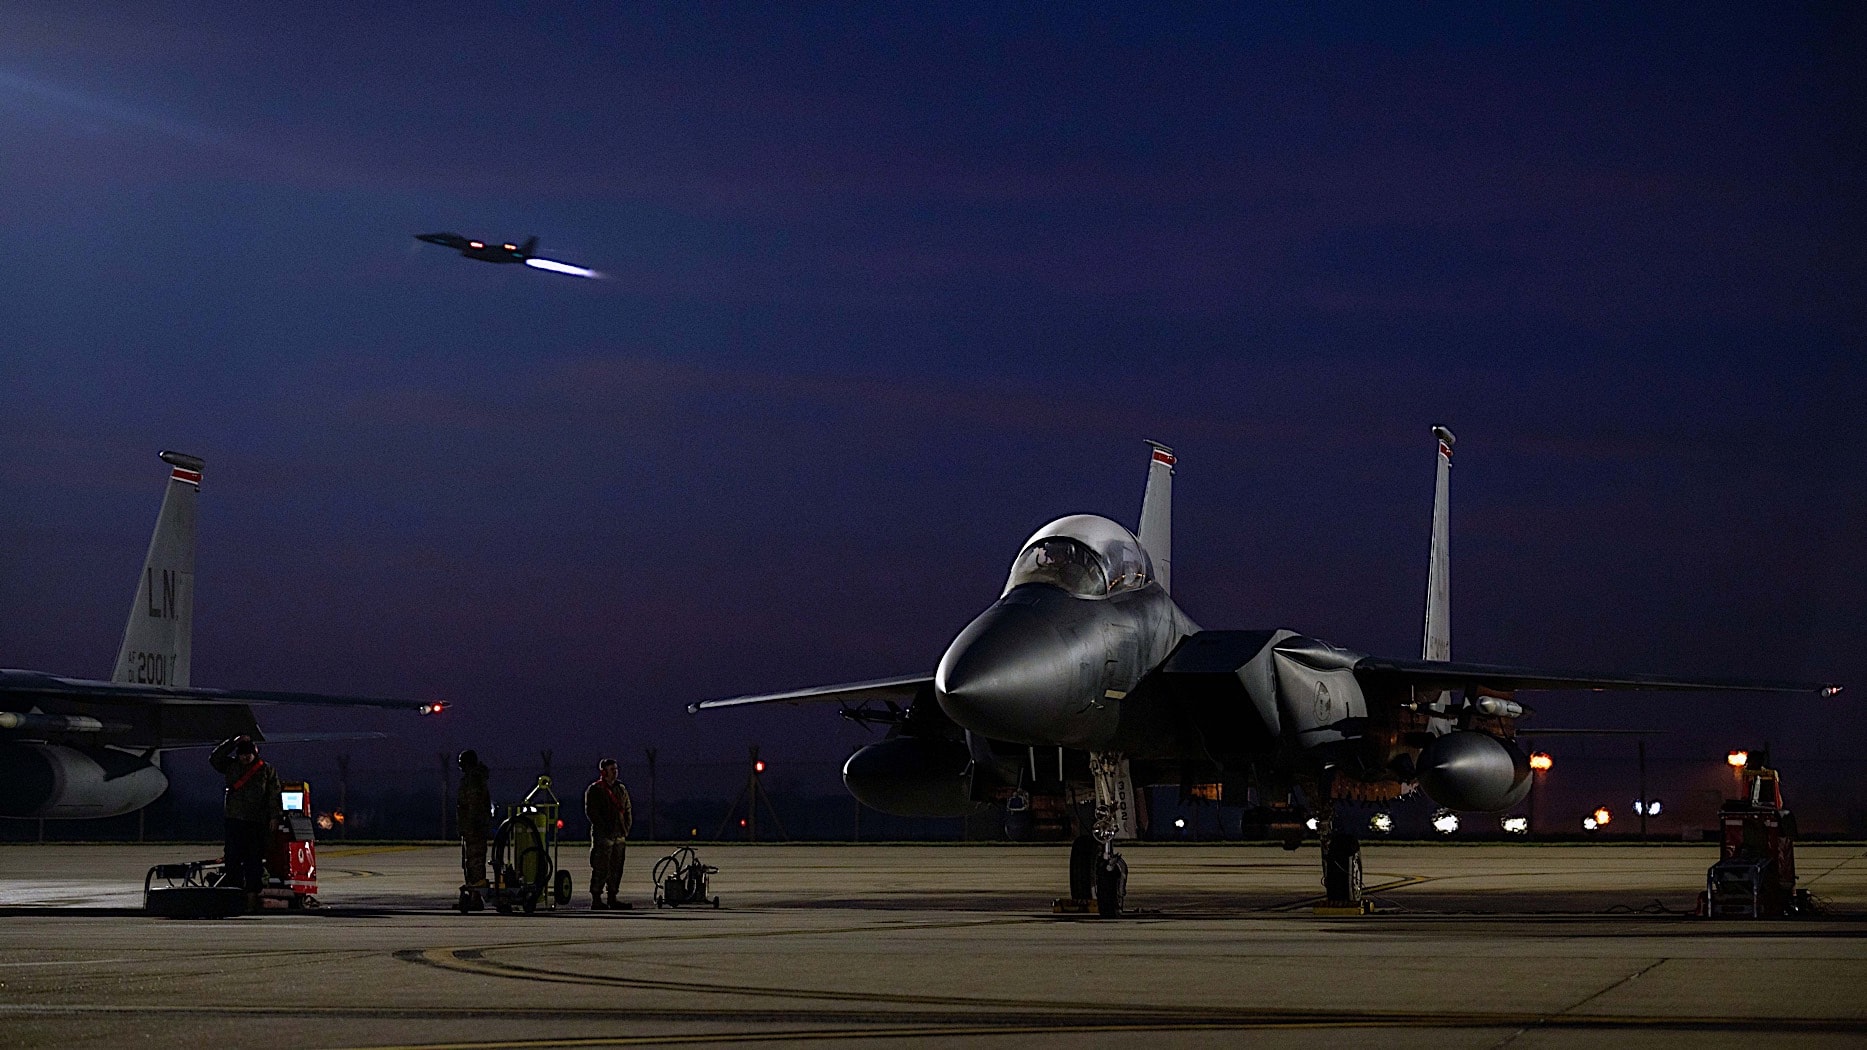 F-15 Eagle Resting at Night Is the Wallpaper War Machine of the Day ...